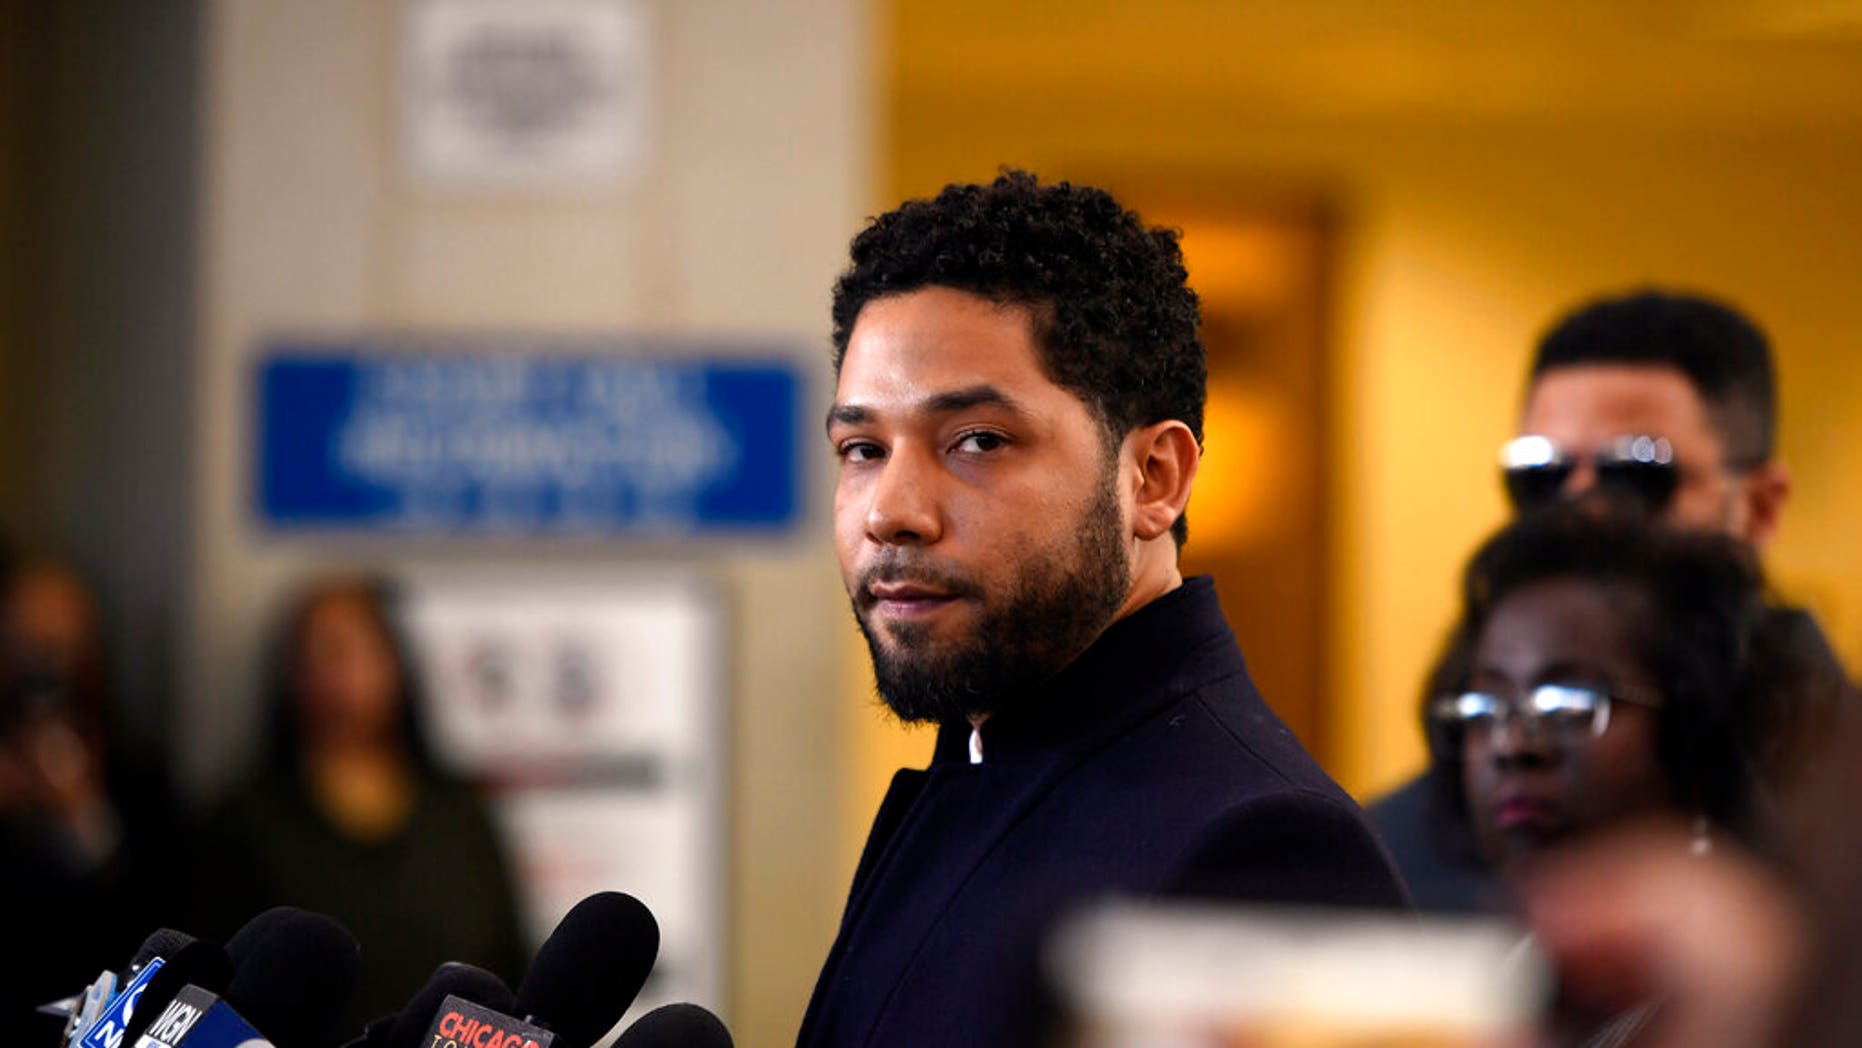 Actor Jussie Smollett talks with the media before leaving Cook County Court after dropping his lawsuits on Tuesday, March 26, 2019 in Chicago. (AP Photo / Paul Beaty)